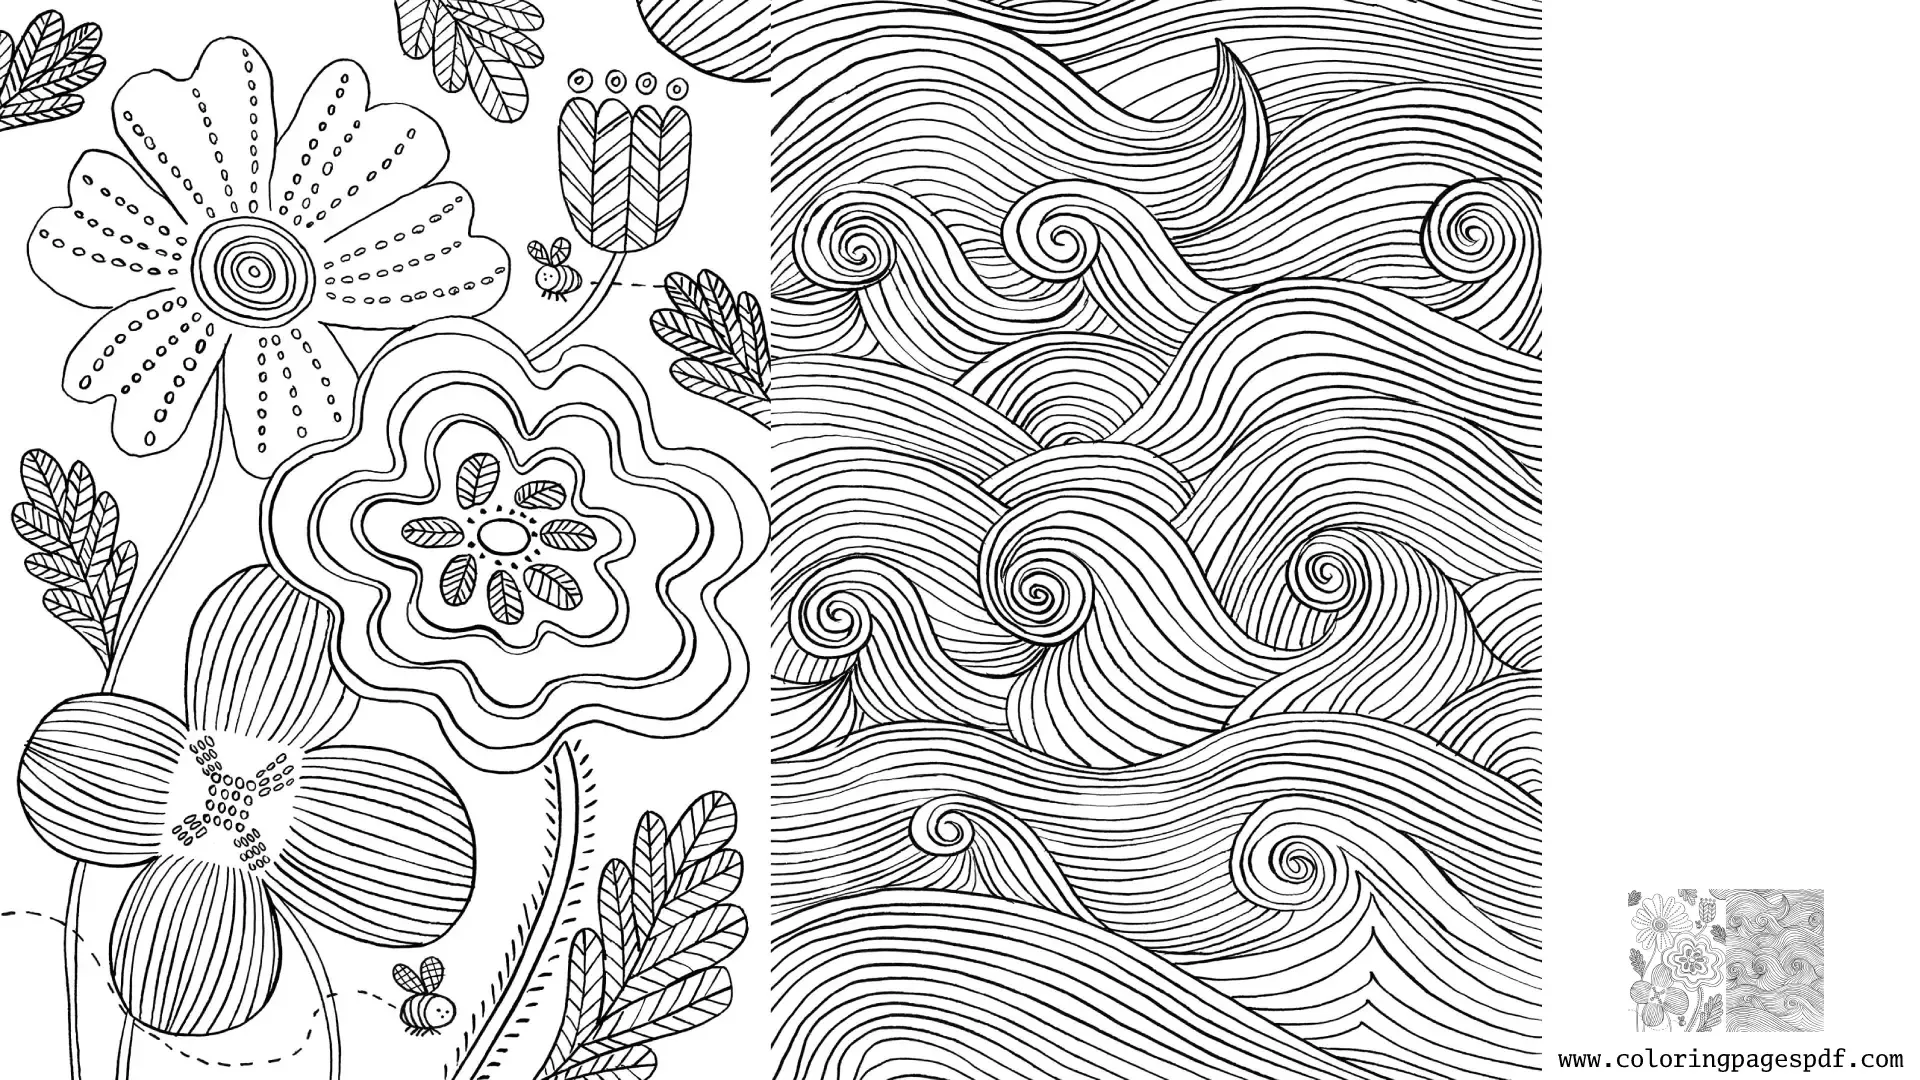 Coloring Pages Of Waves And Flowers Mandala